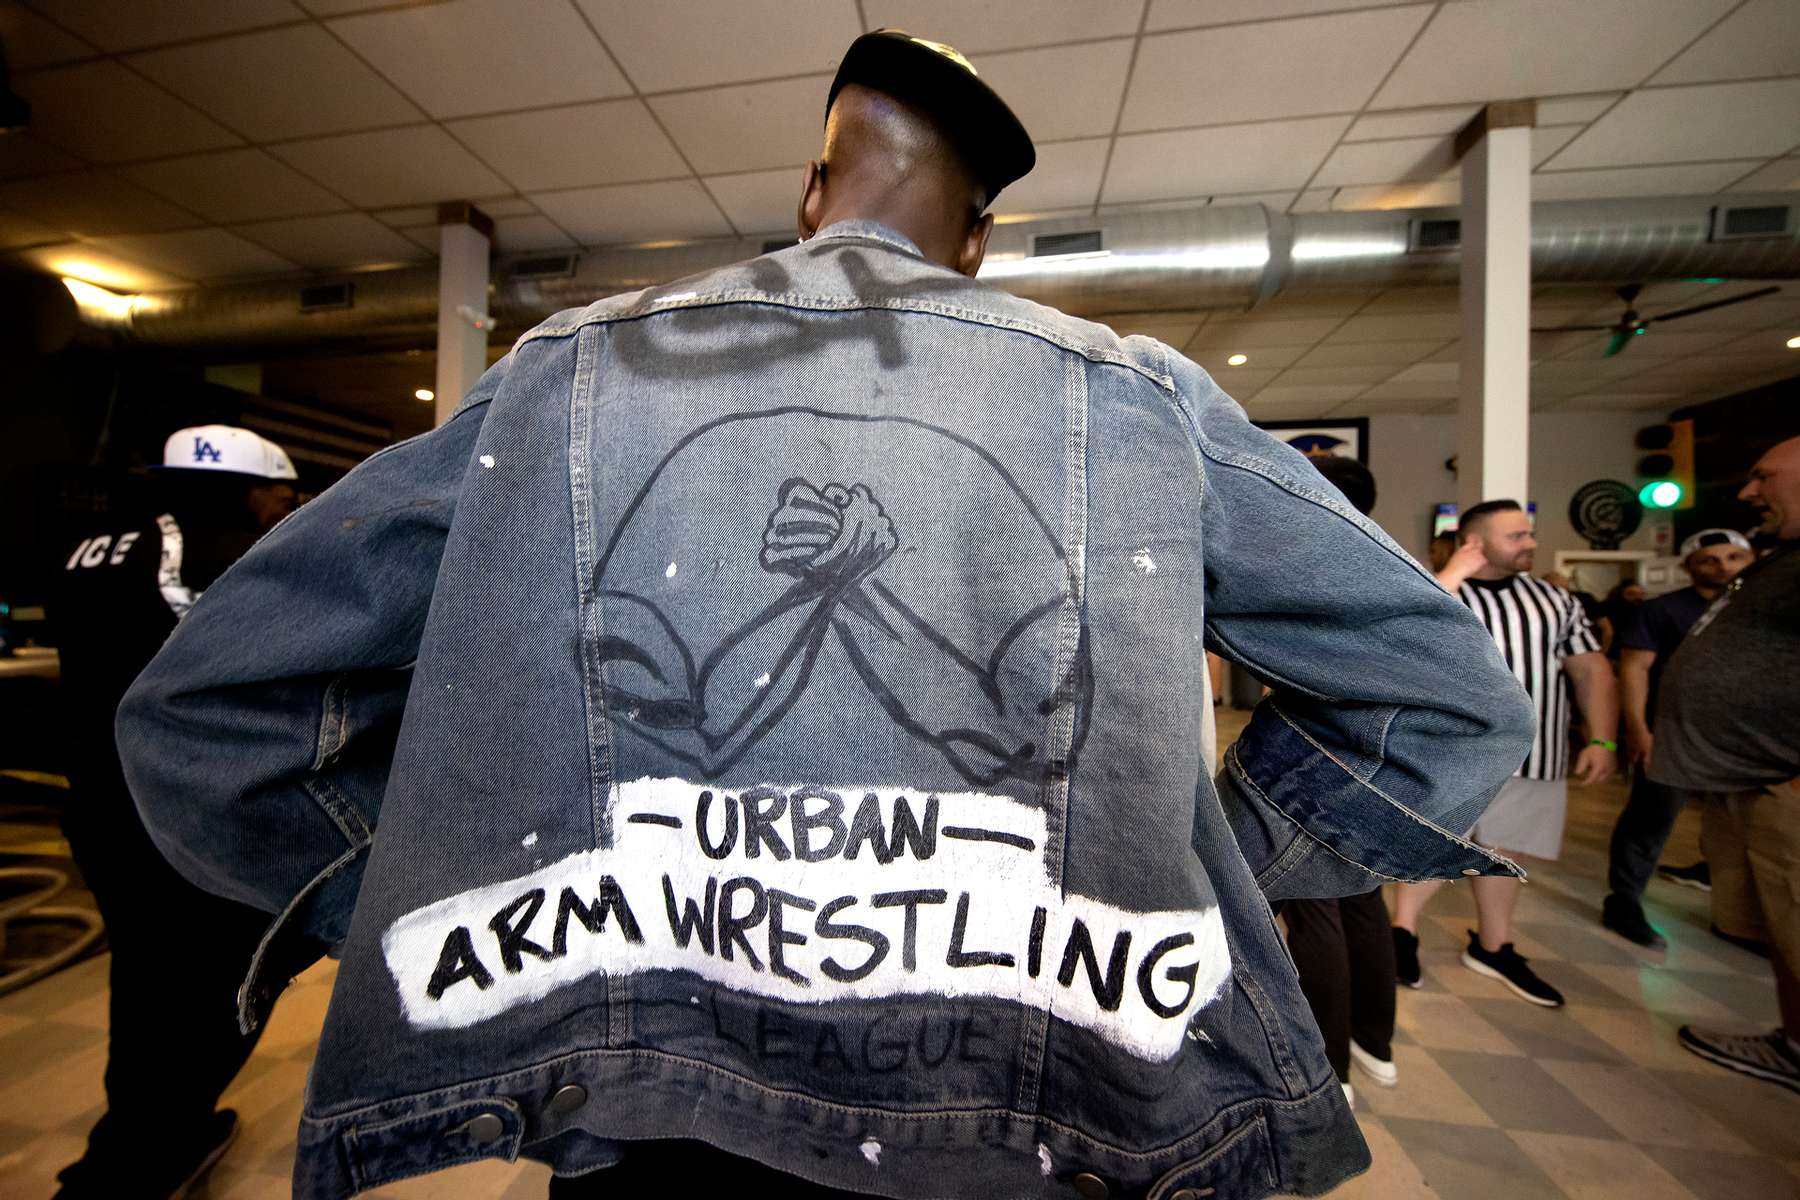 Gerren Nixon of the Urban Arm Wrestling League, displays his jacket  during the 98% Protest Series Arm Wrestling tournament on May 15, 2021 in Philadelphia Pennsylvania.  